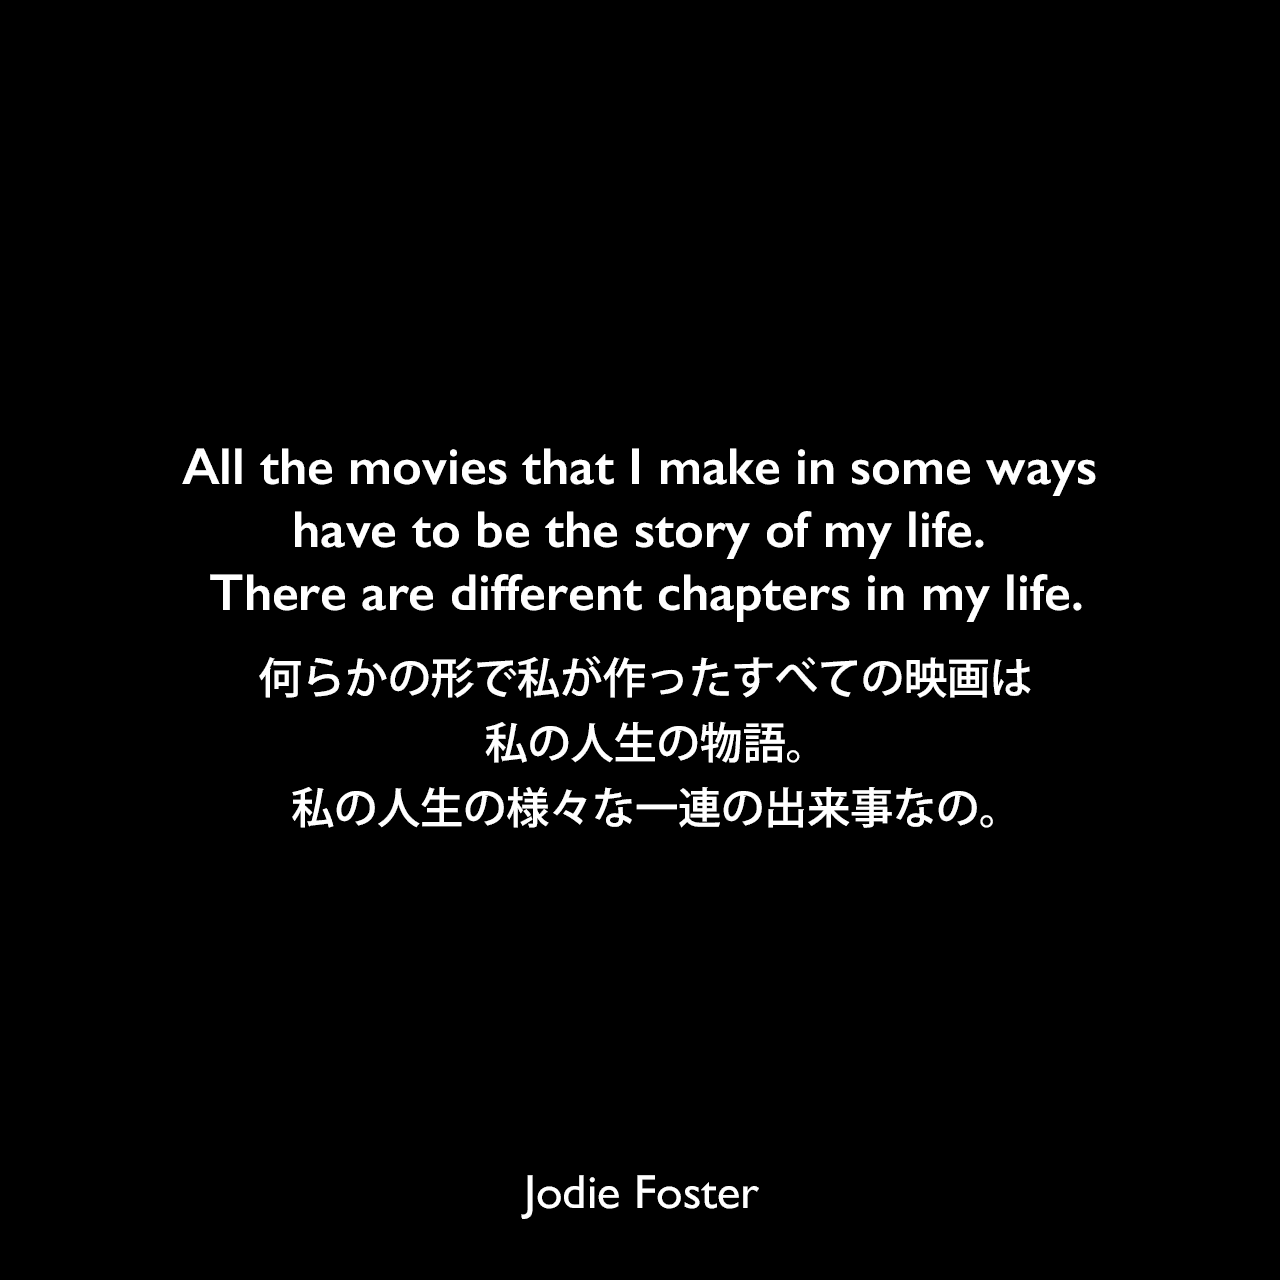 All the movies that I make in some ways have to be the story of my life. There are different chapters in my life.何らかの形で私が作ったすべての映画は、私の人生の物語。私の人生の様々な一連の出来事なの。Jodie Foster